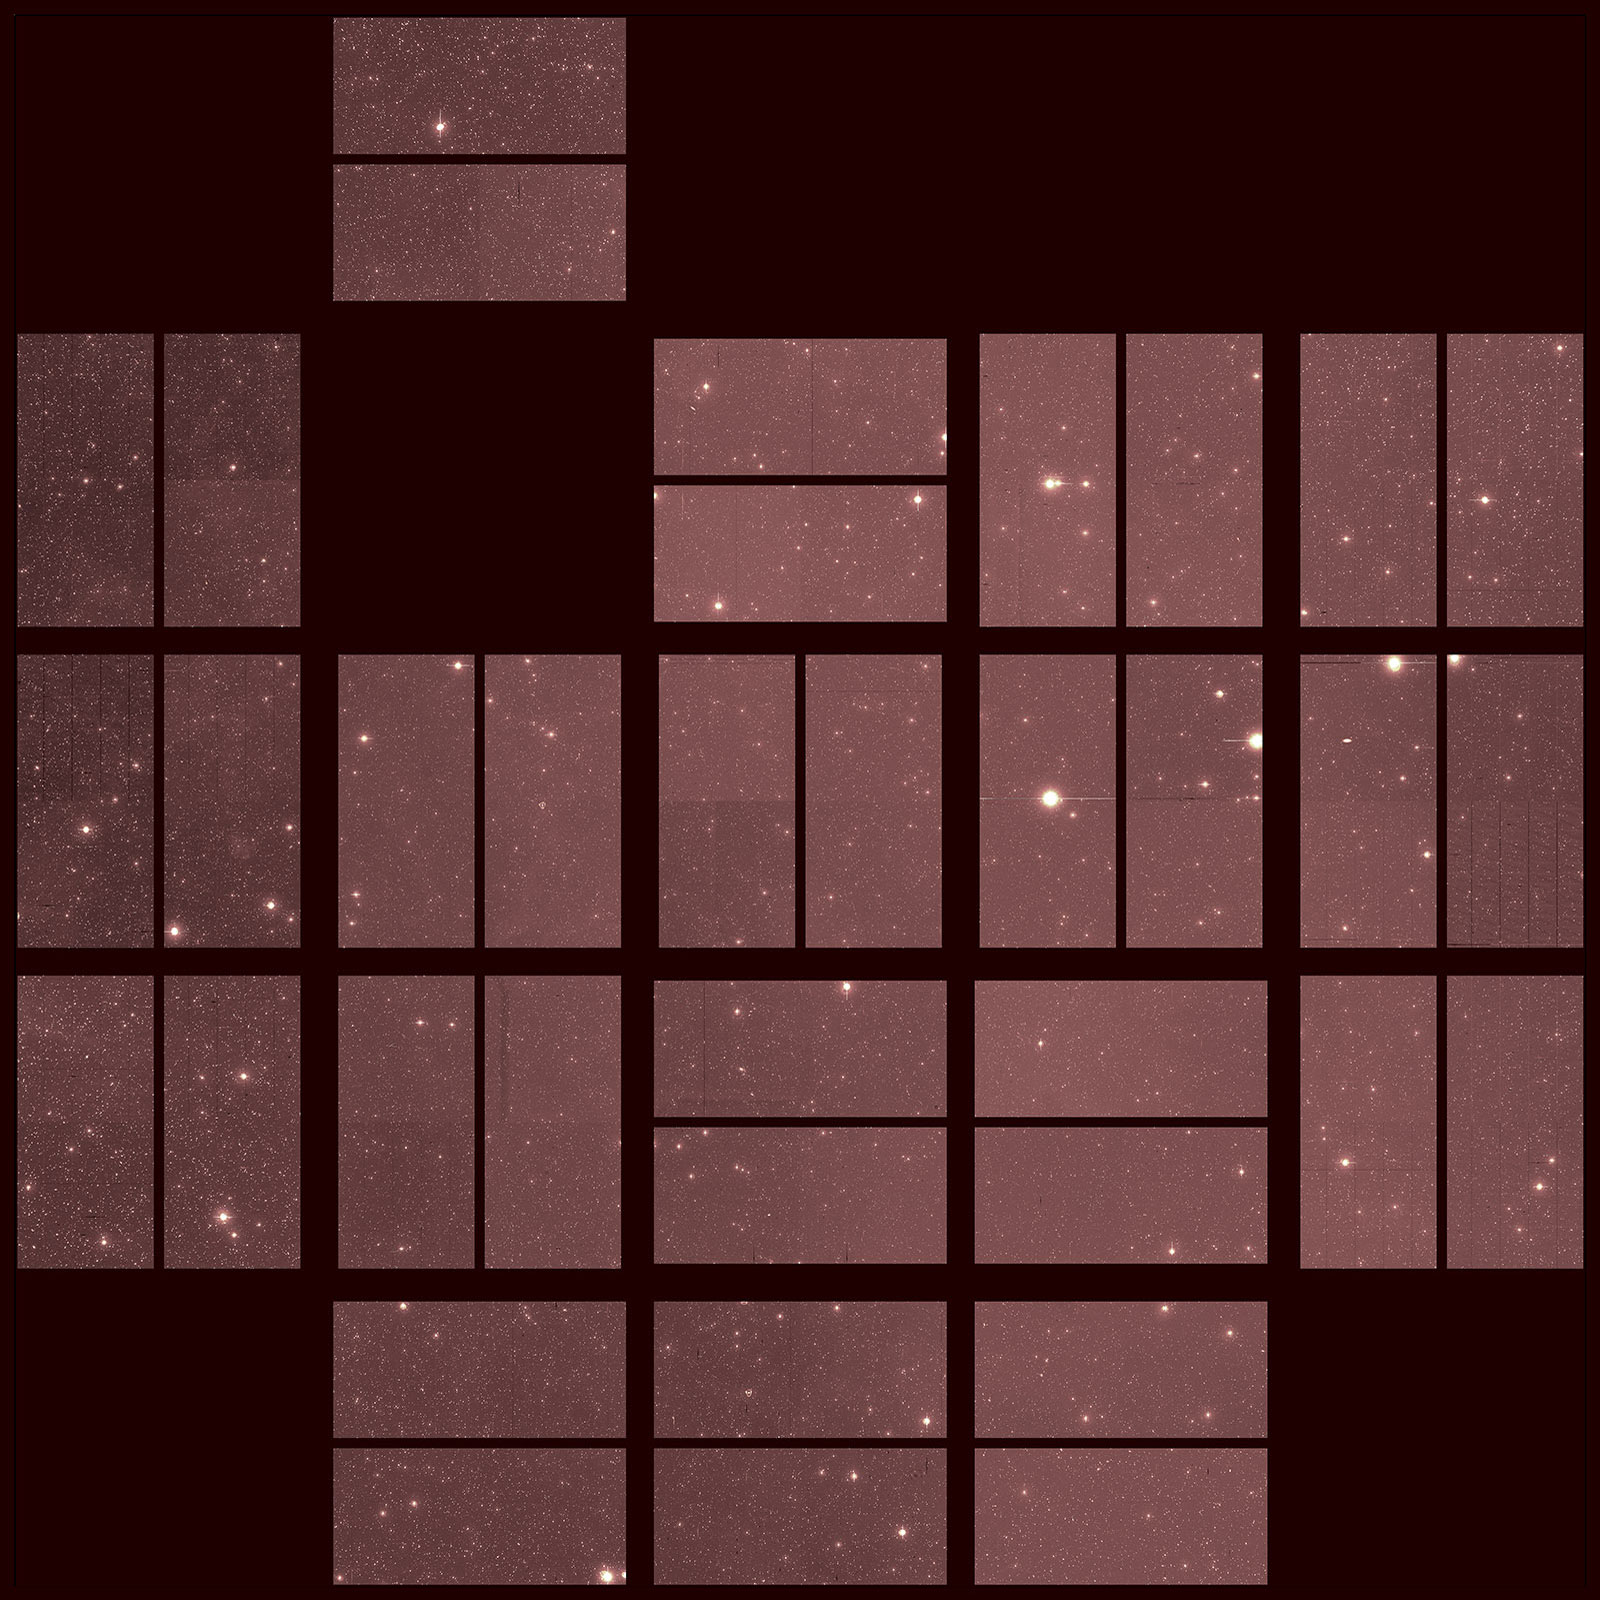 Grid view of distant stars with panels missing.